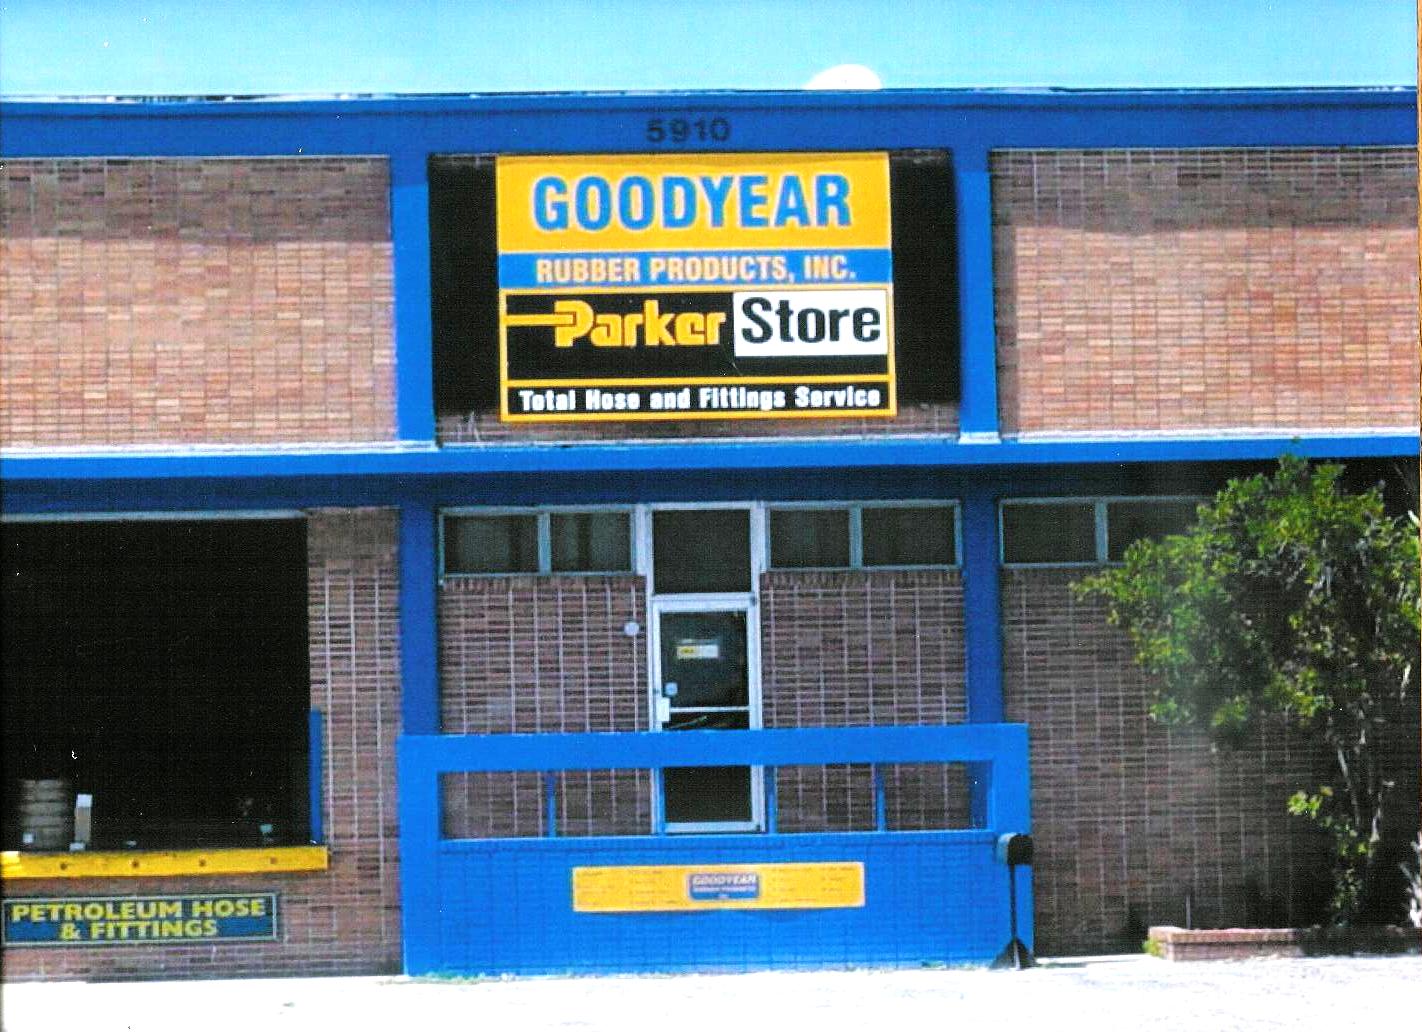 Goodyear Rubber Products Inc - Tampa ParkerStore